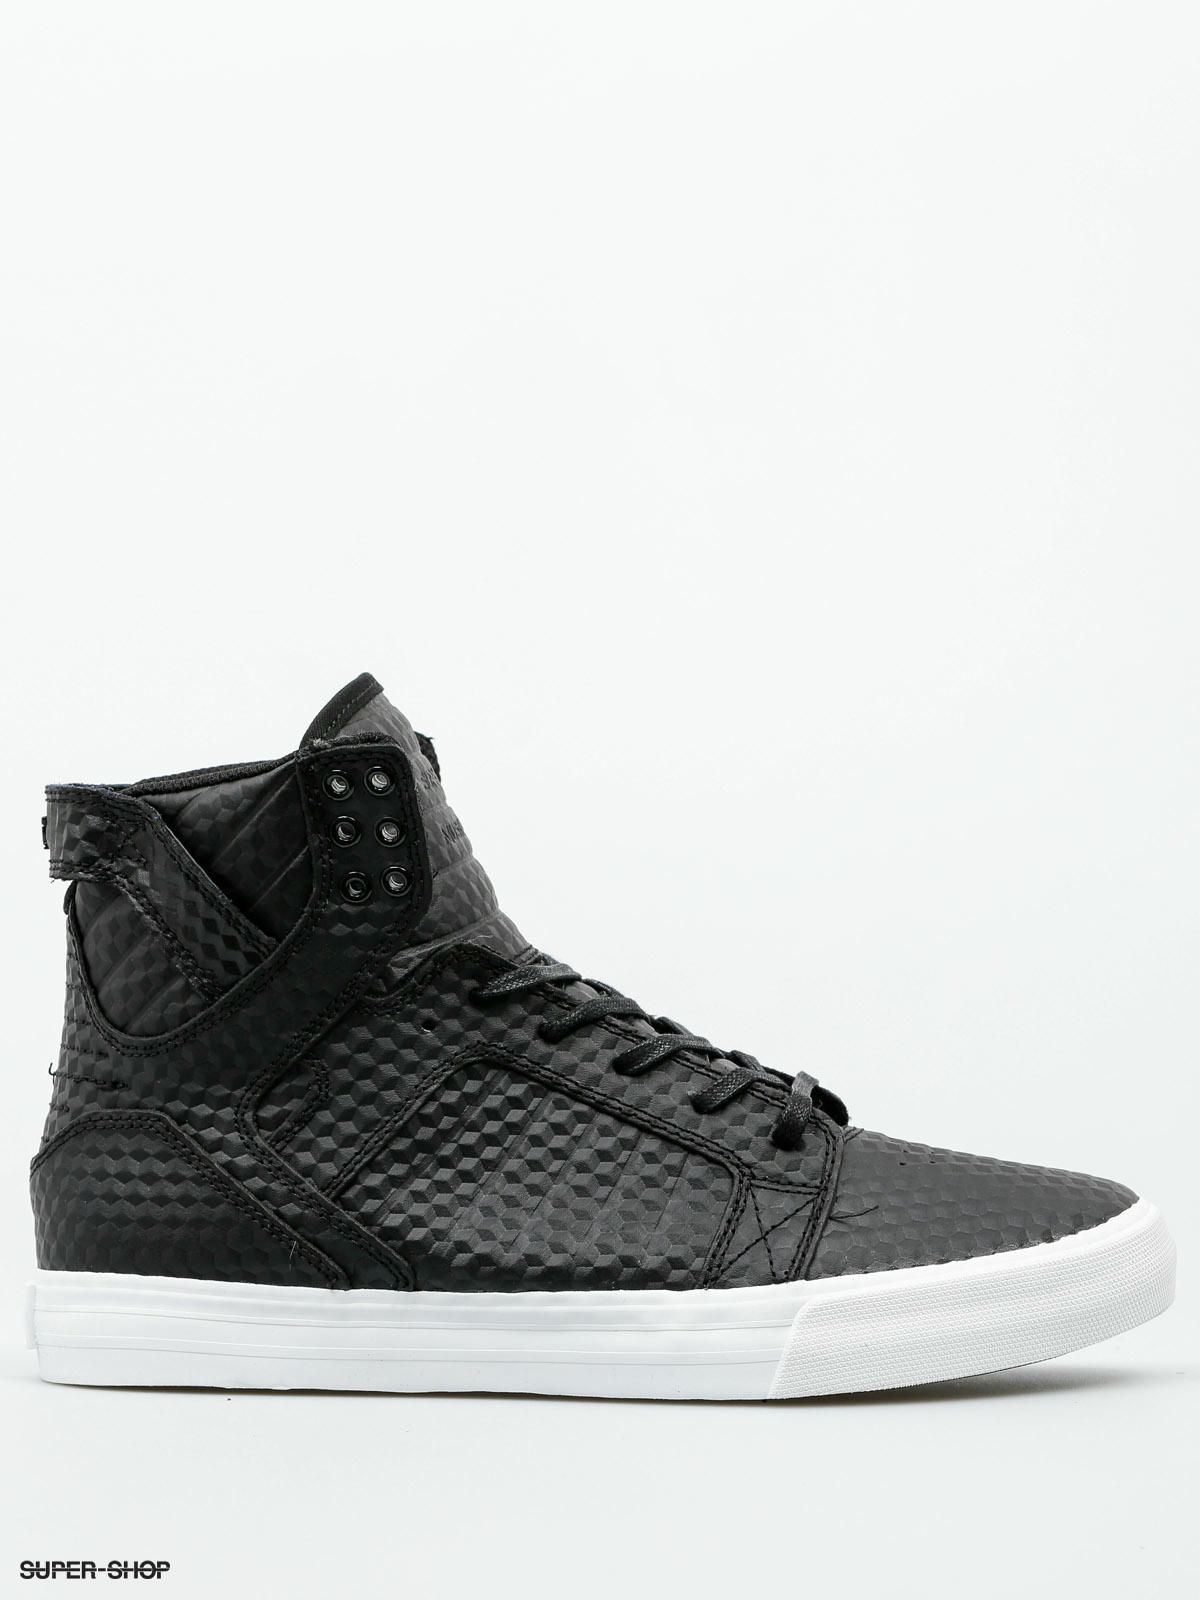 supra shoes black and white